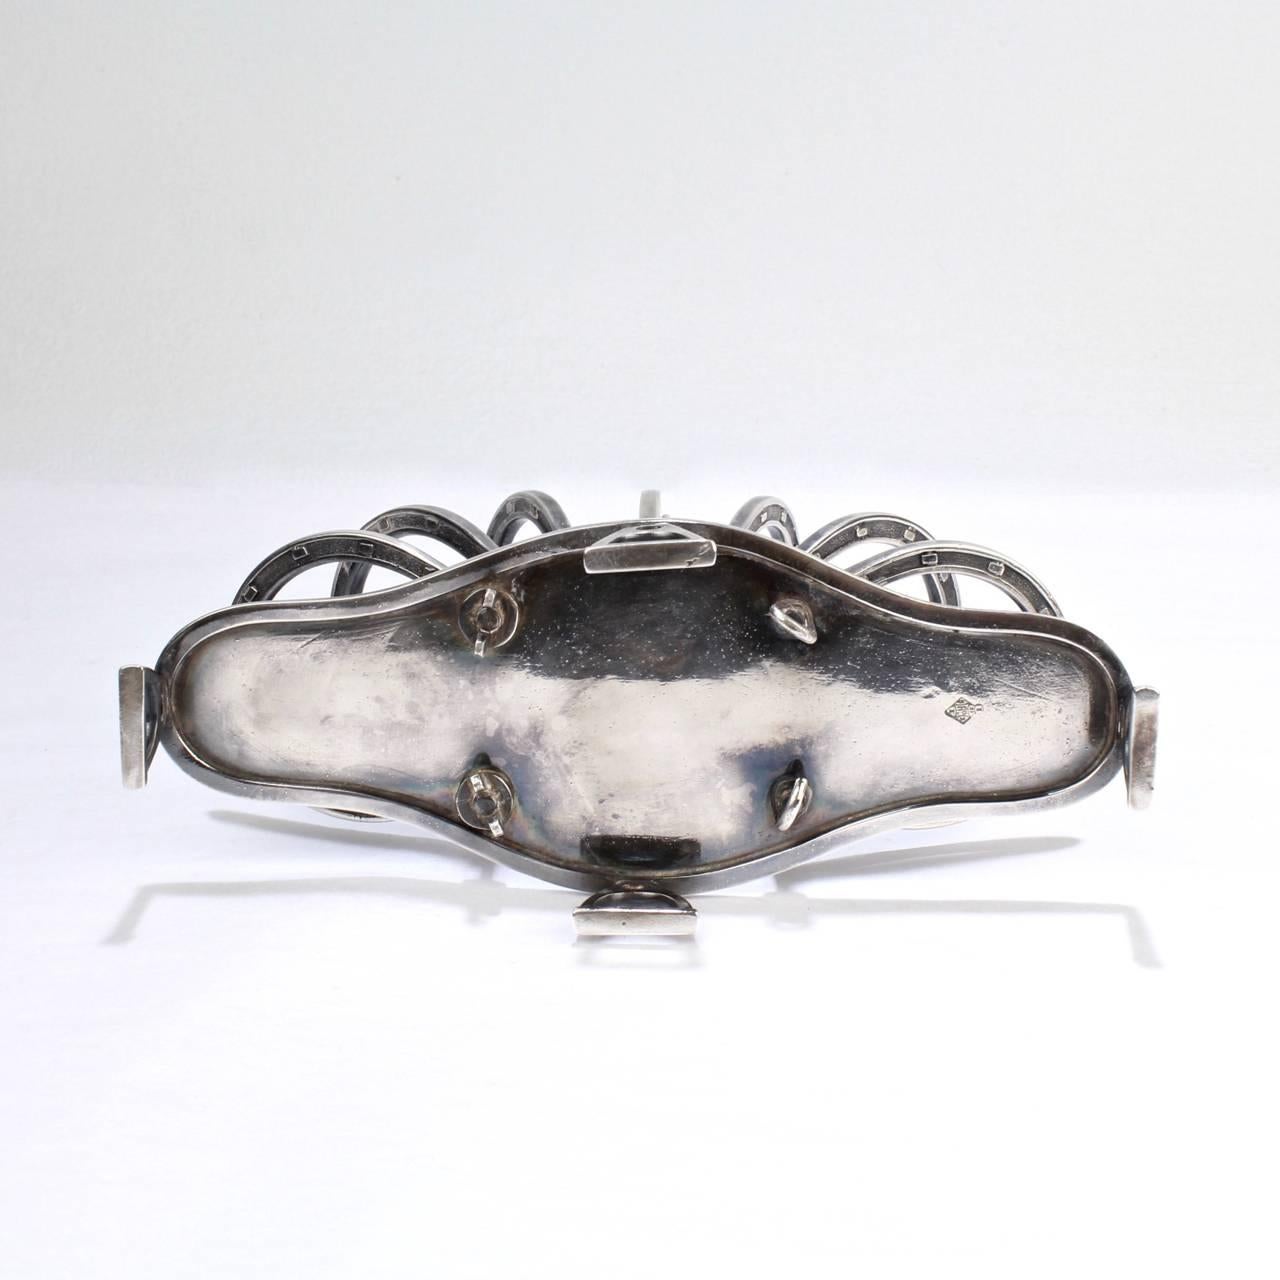 Antique English Equestrian Silver Plated Toast or Letter Rack with Horseshoes 5